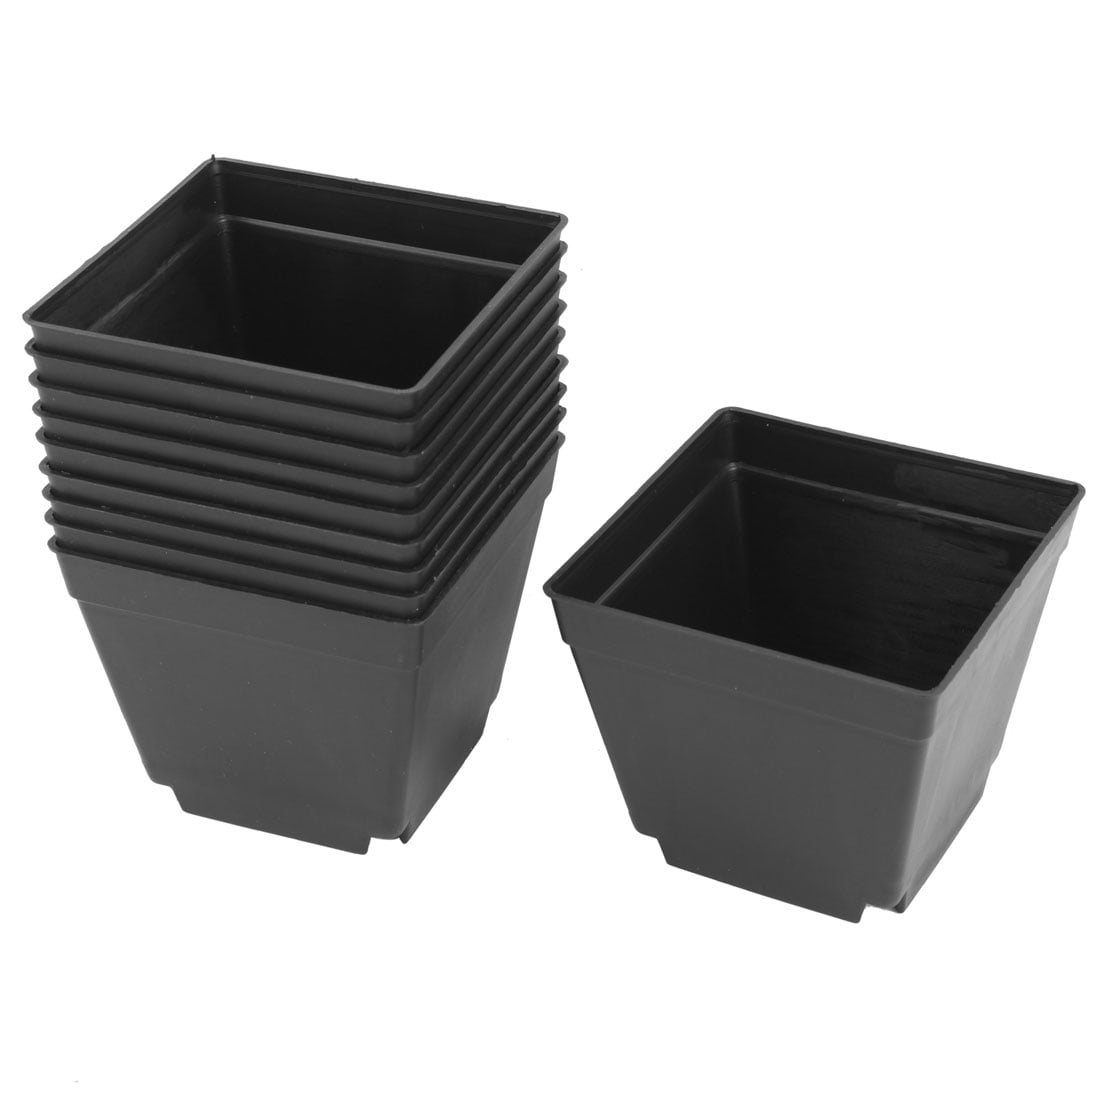 10pcs Indoor Outdoor Home Garden Small Square Plastic Flower Pots Trays Black 